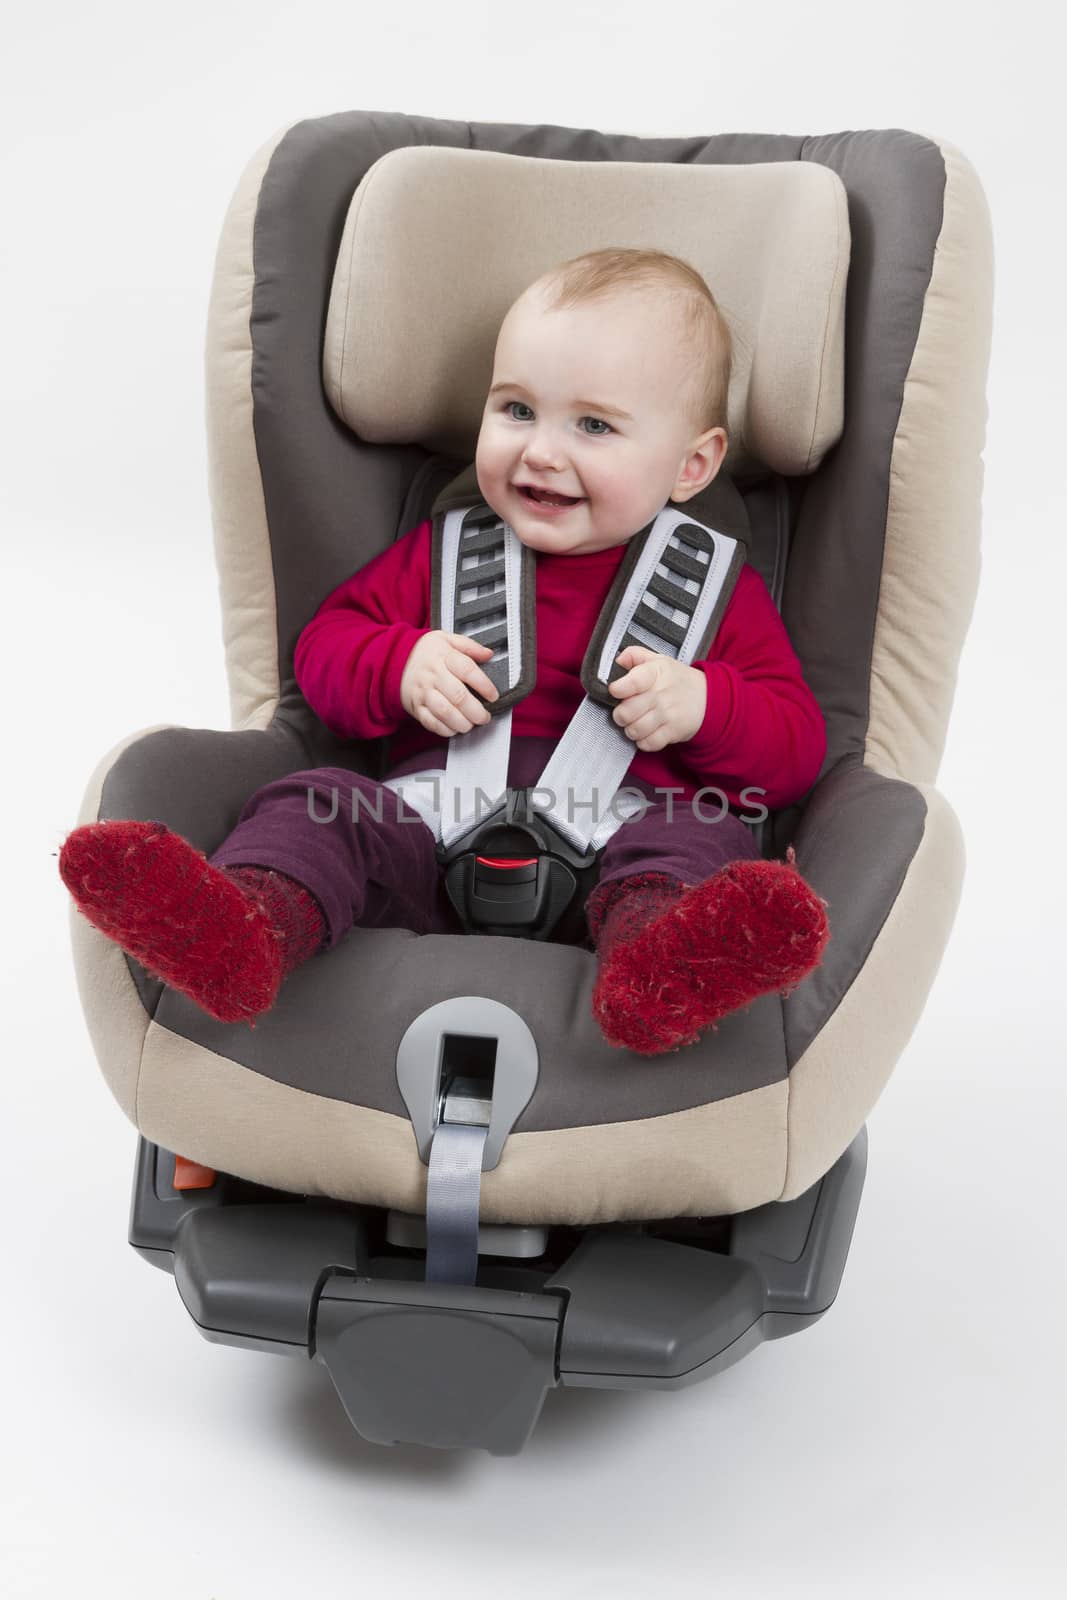 booster seat with child for a car in light background. studio shot